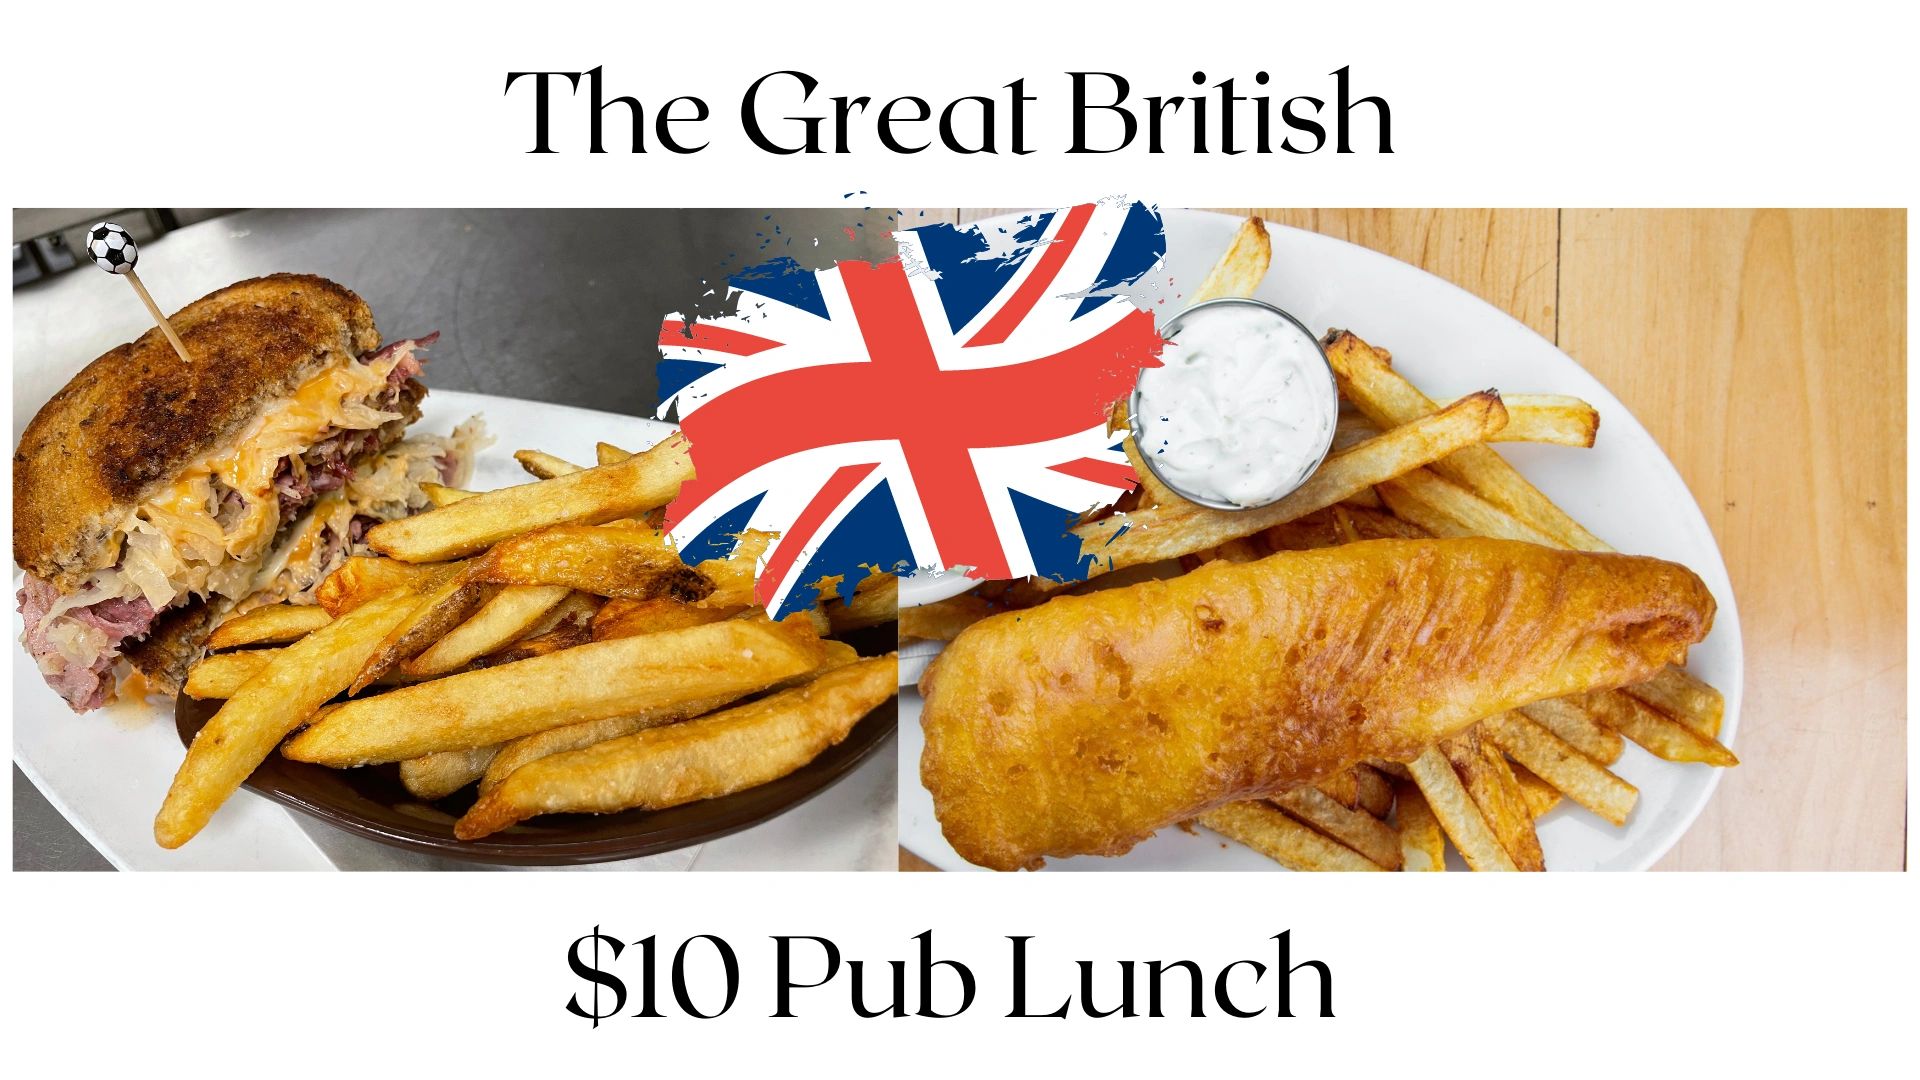 The Great British $10 Pub Lunch